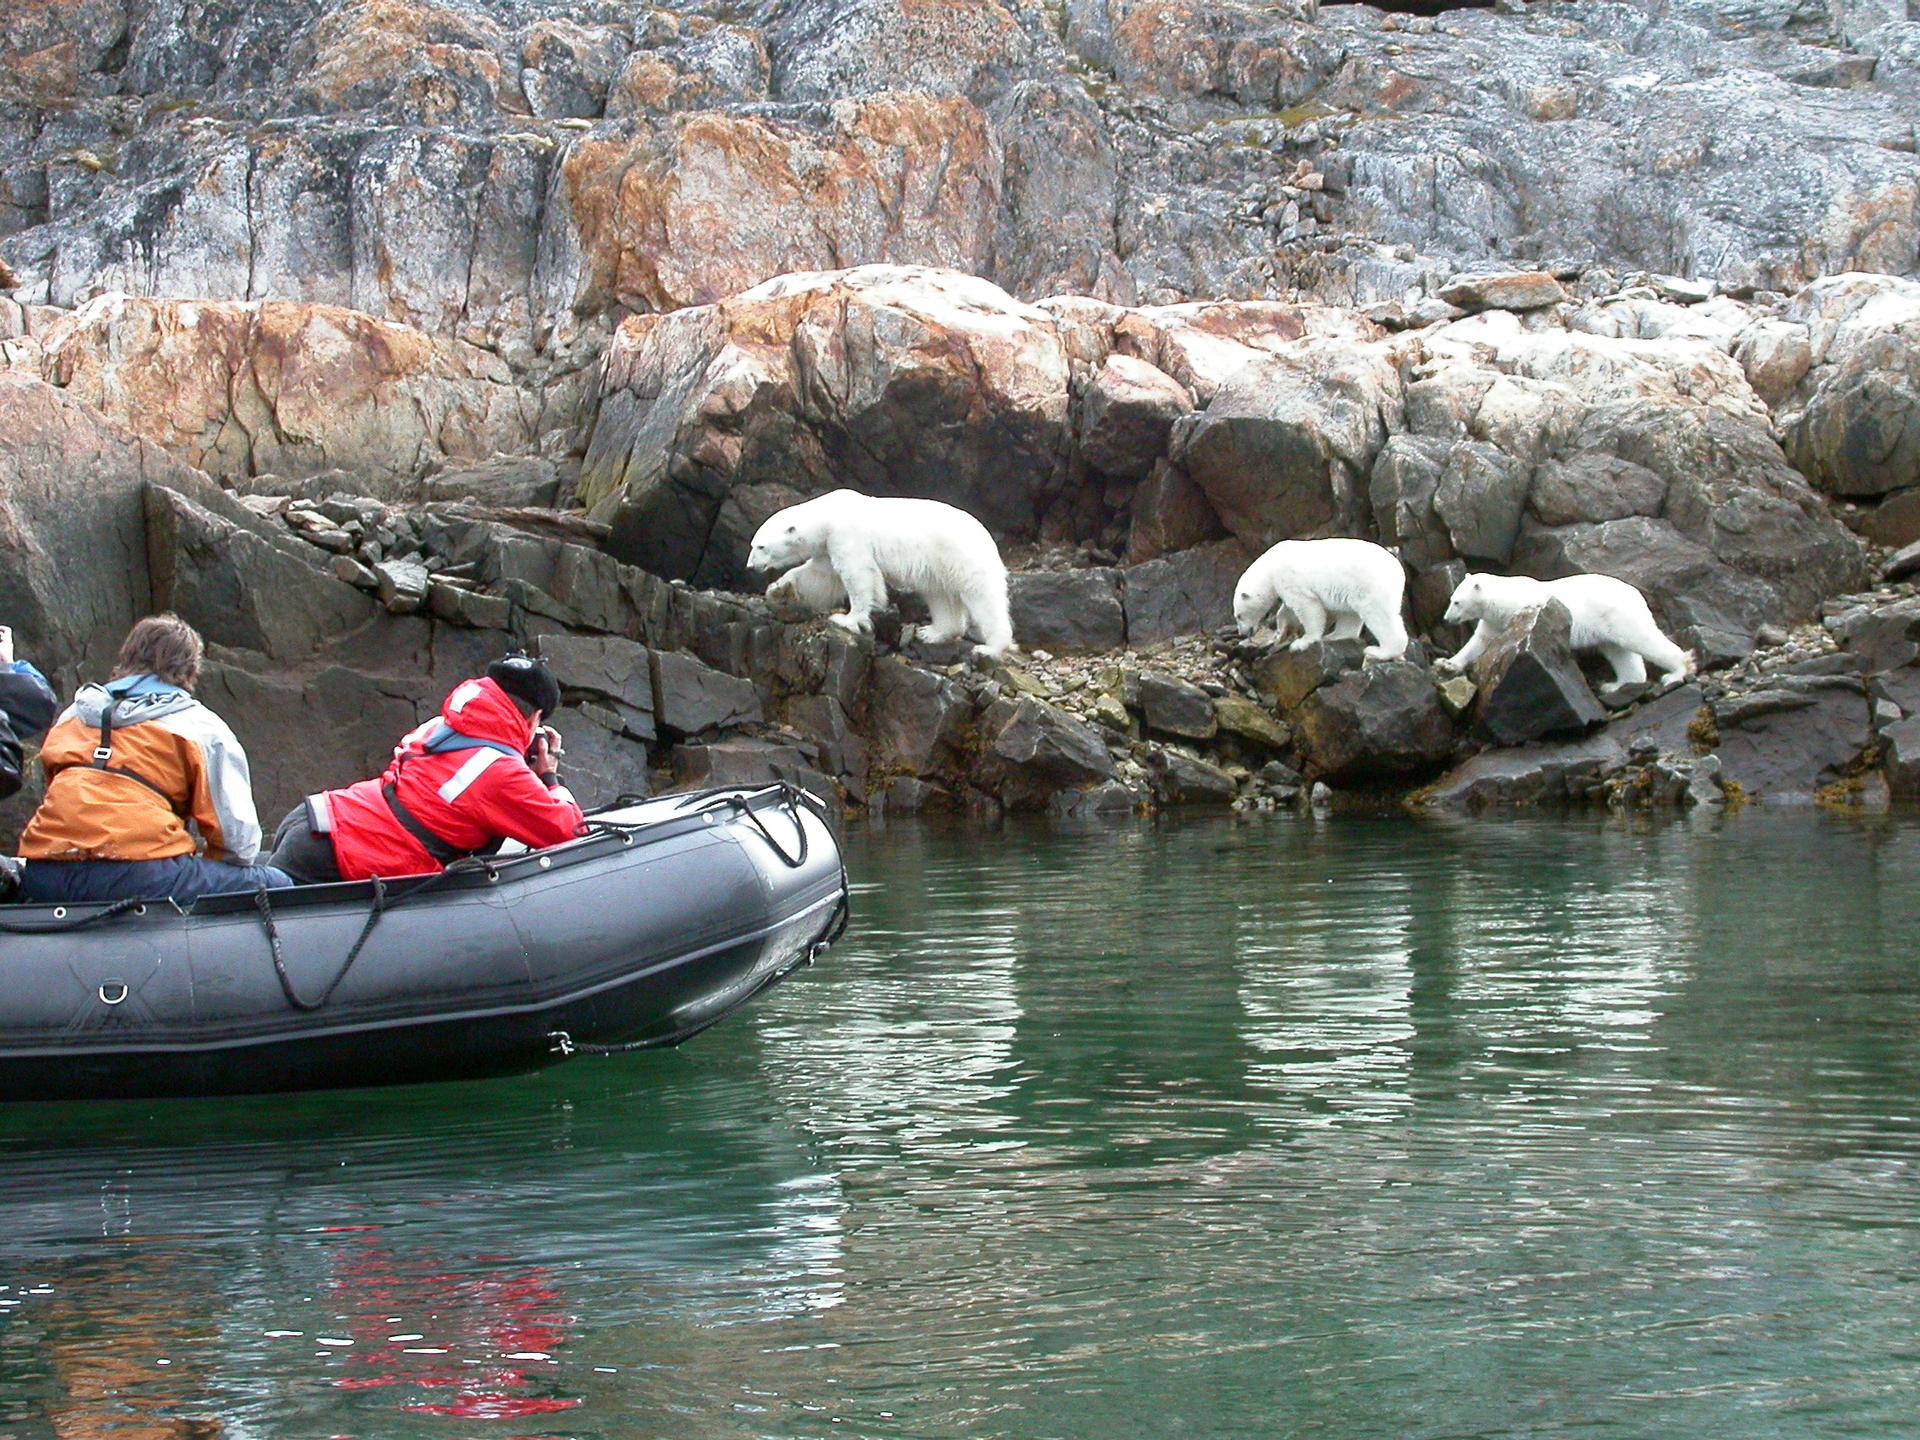 As well as the polar bear, you may spot other arctic wildlife including sea birds, bowhead, beluga, narwhal, and seal